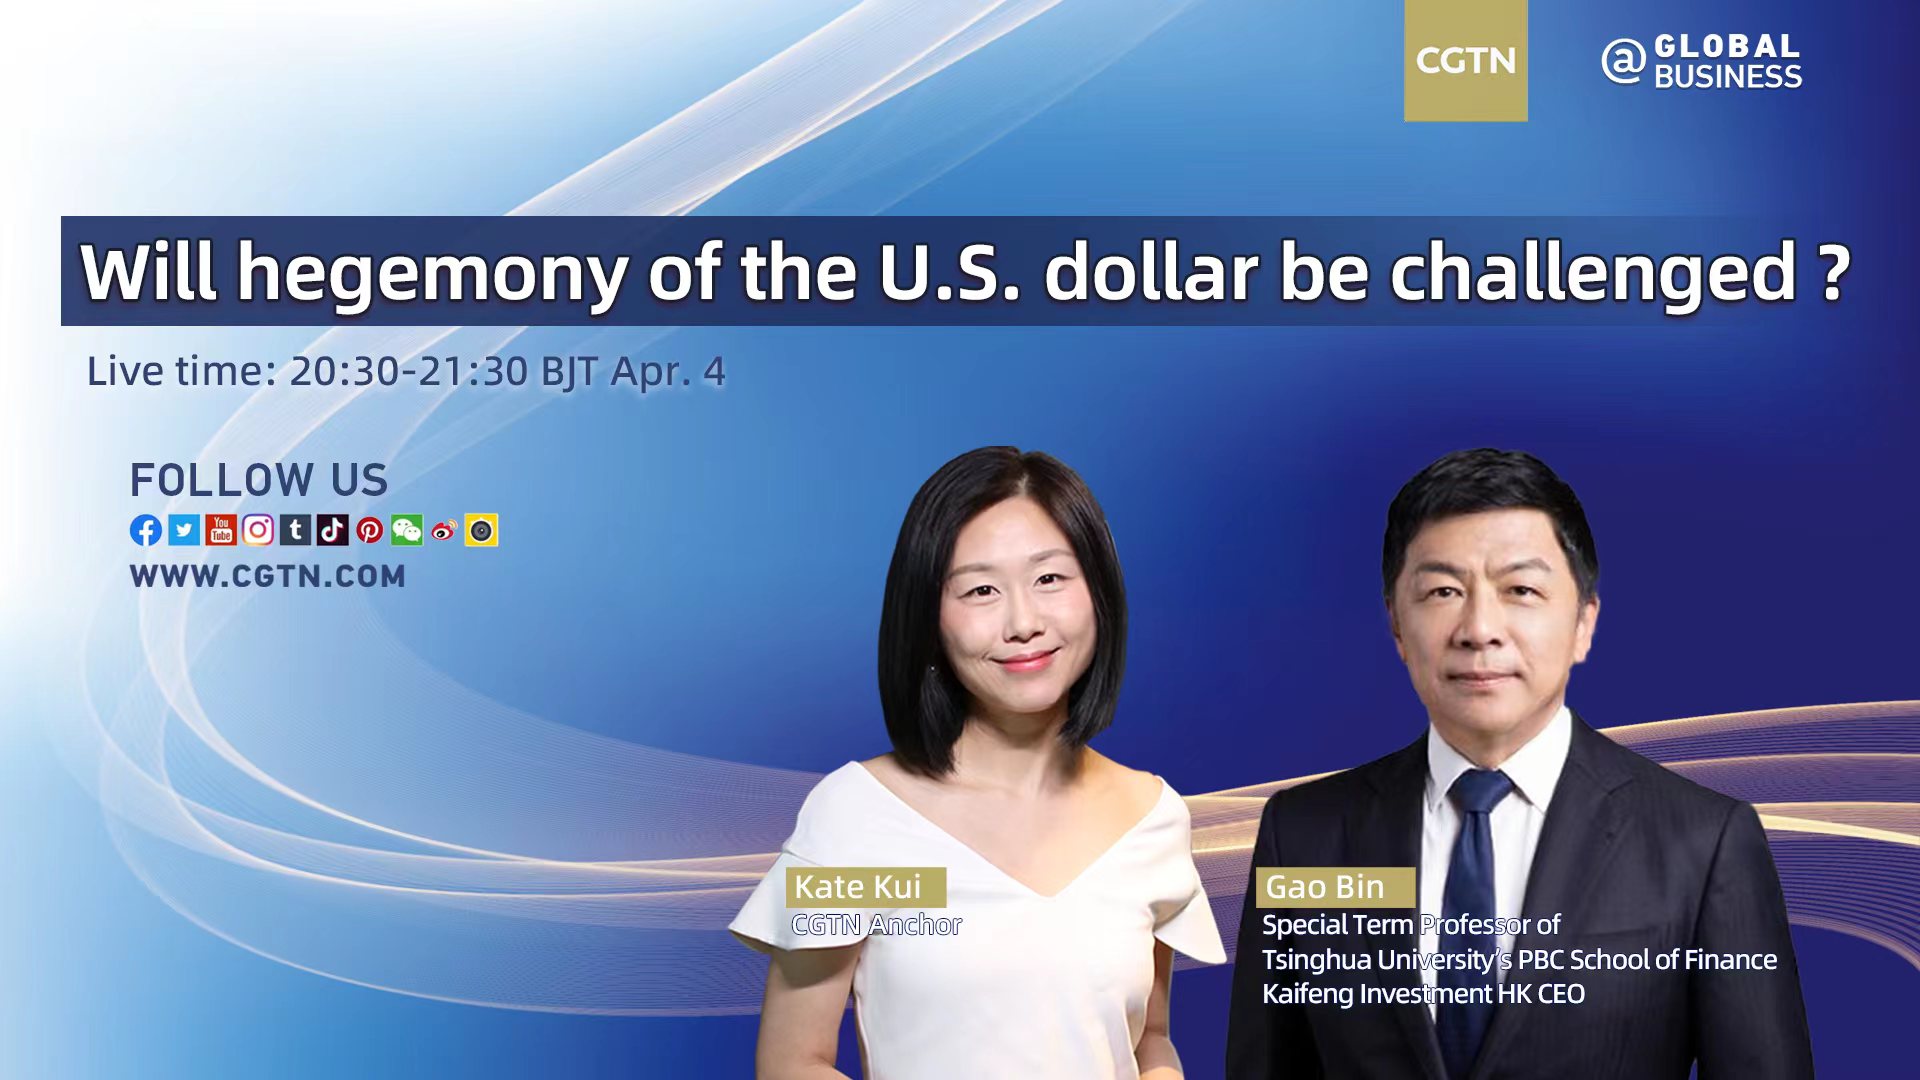 Live: Will hegemony of the U.S. dollar be challenged? 